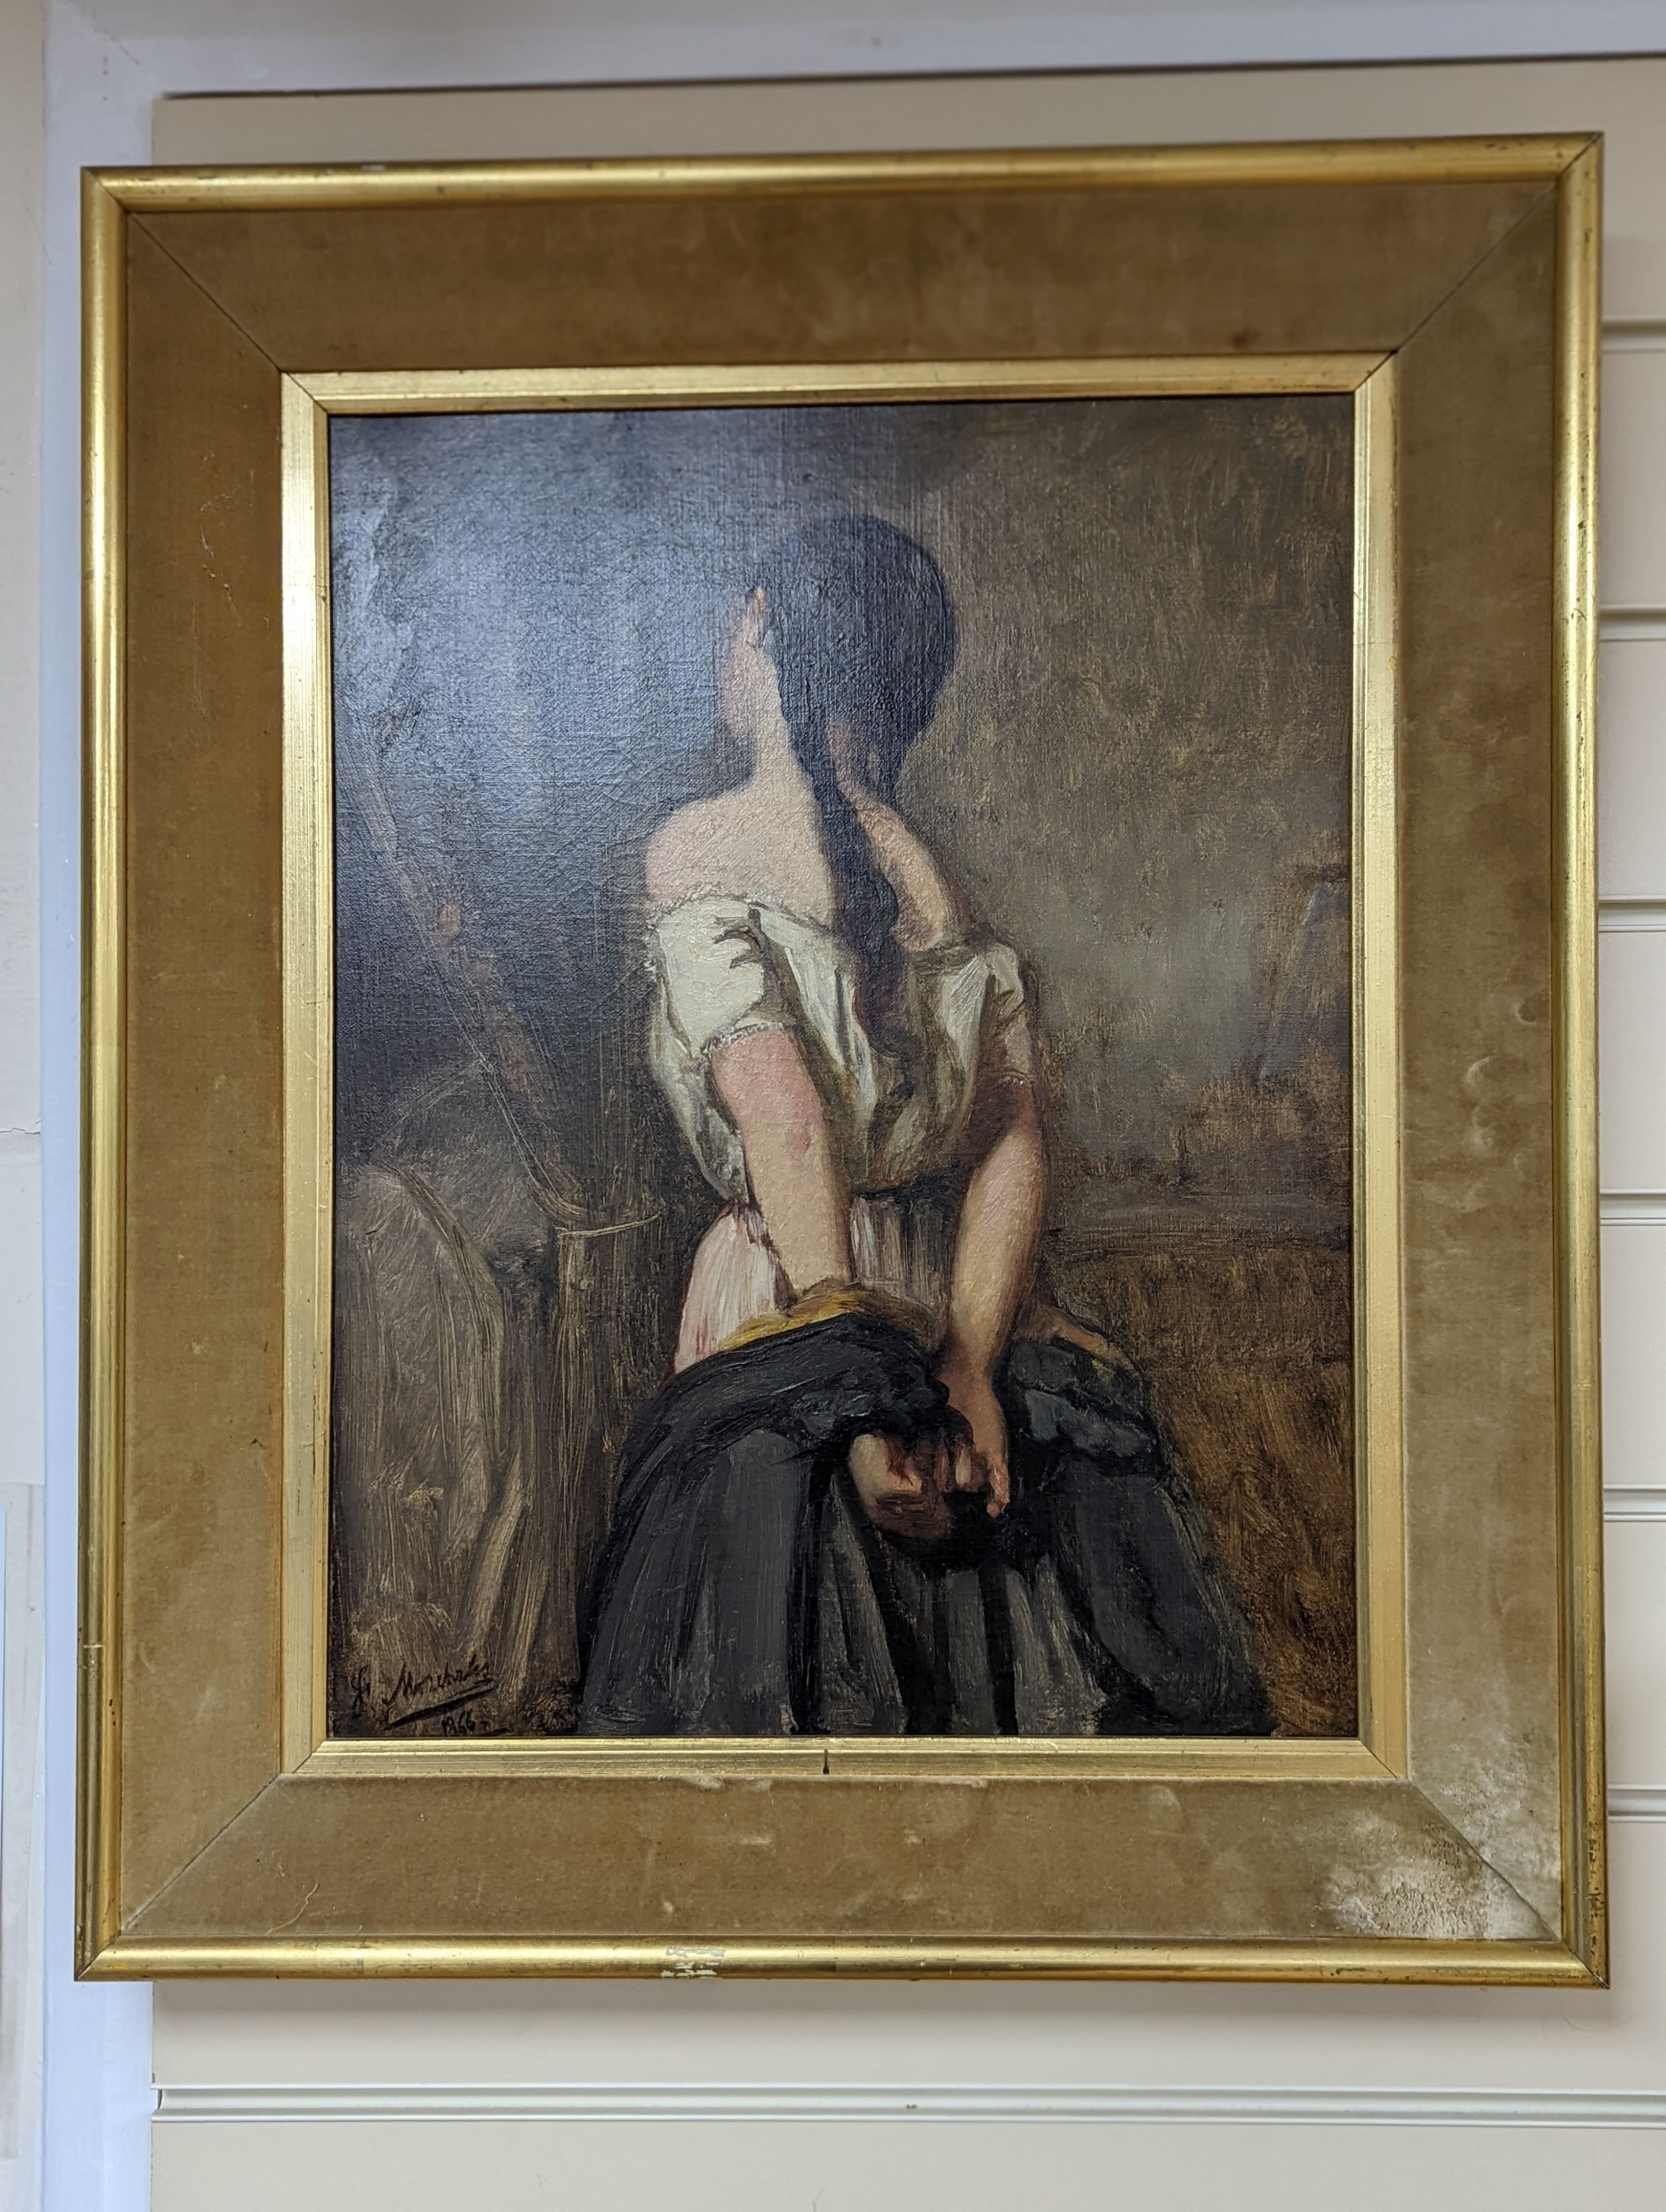 J.F. Marchales (19th C. French), oil on canvas, Study of a woman undressing, signed and dated 1866, 45 x 34cm